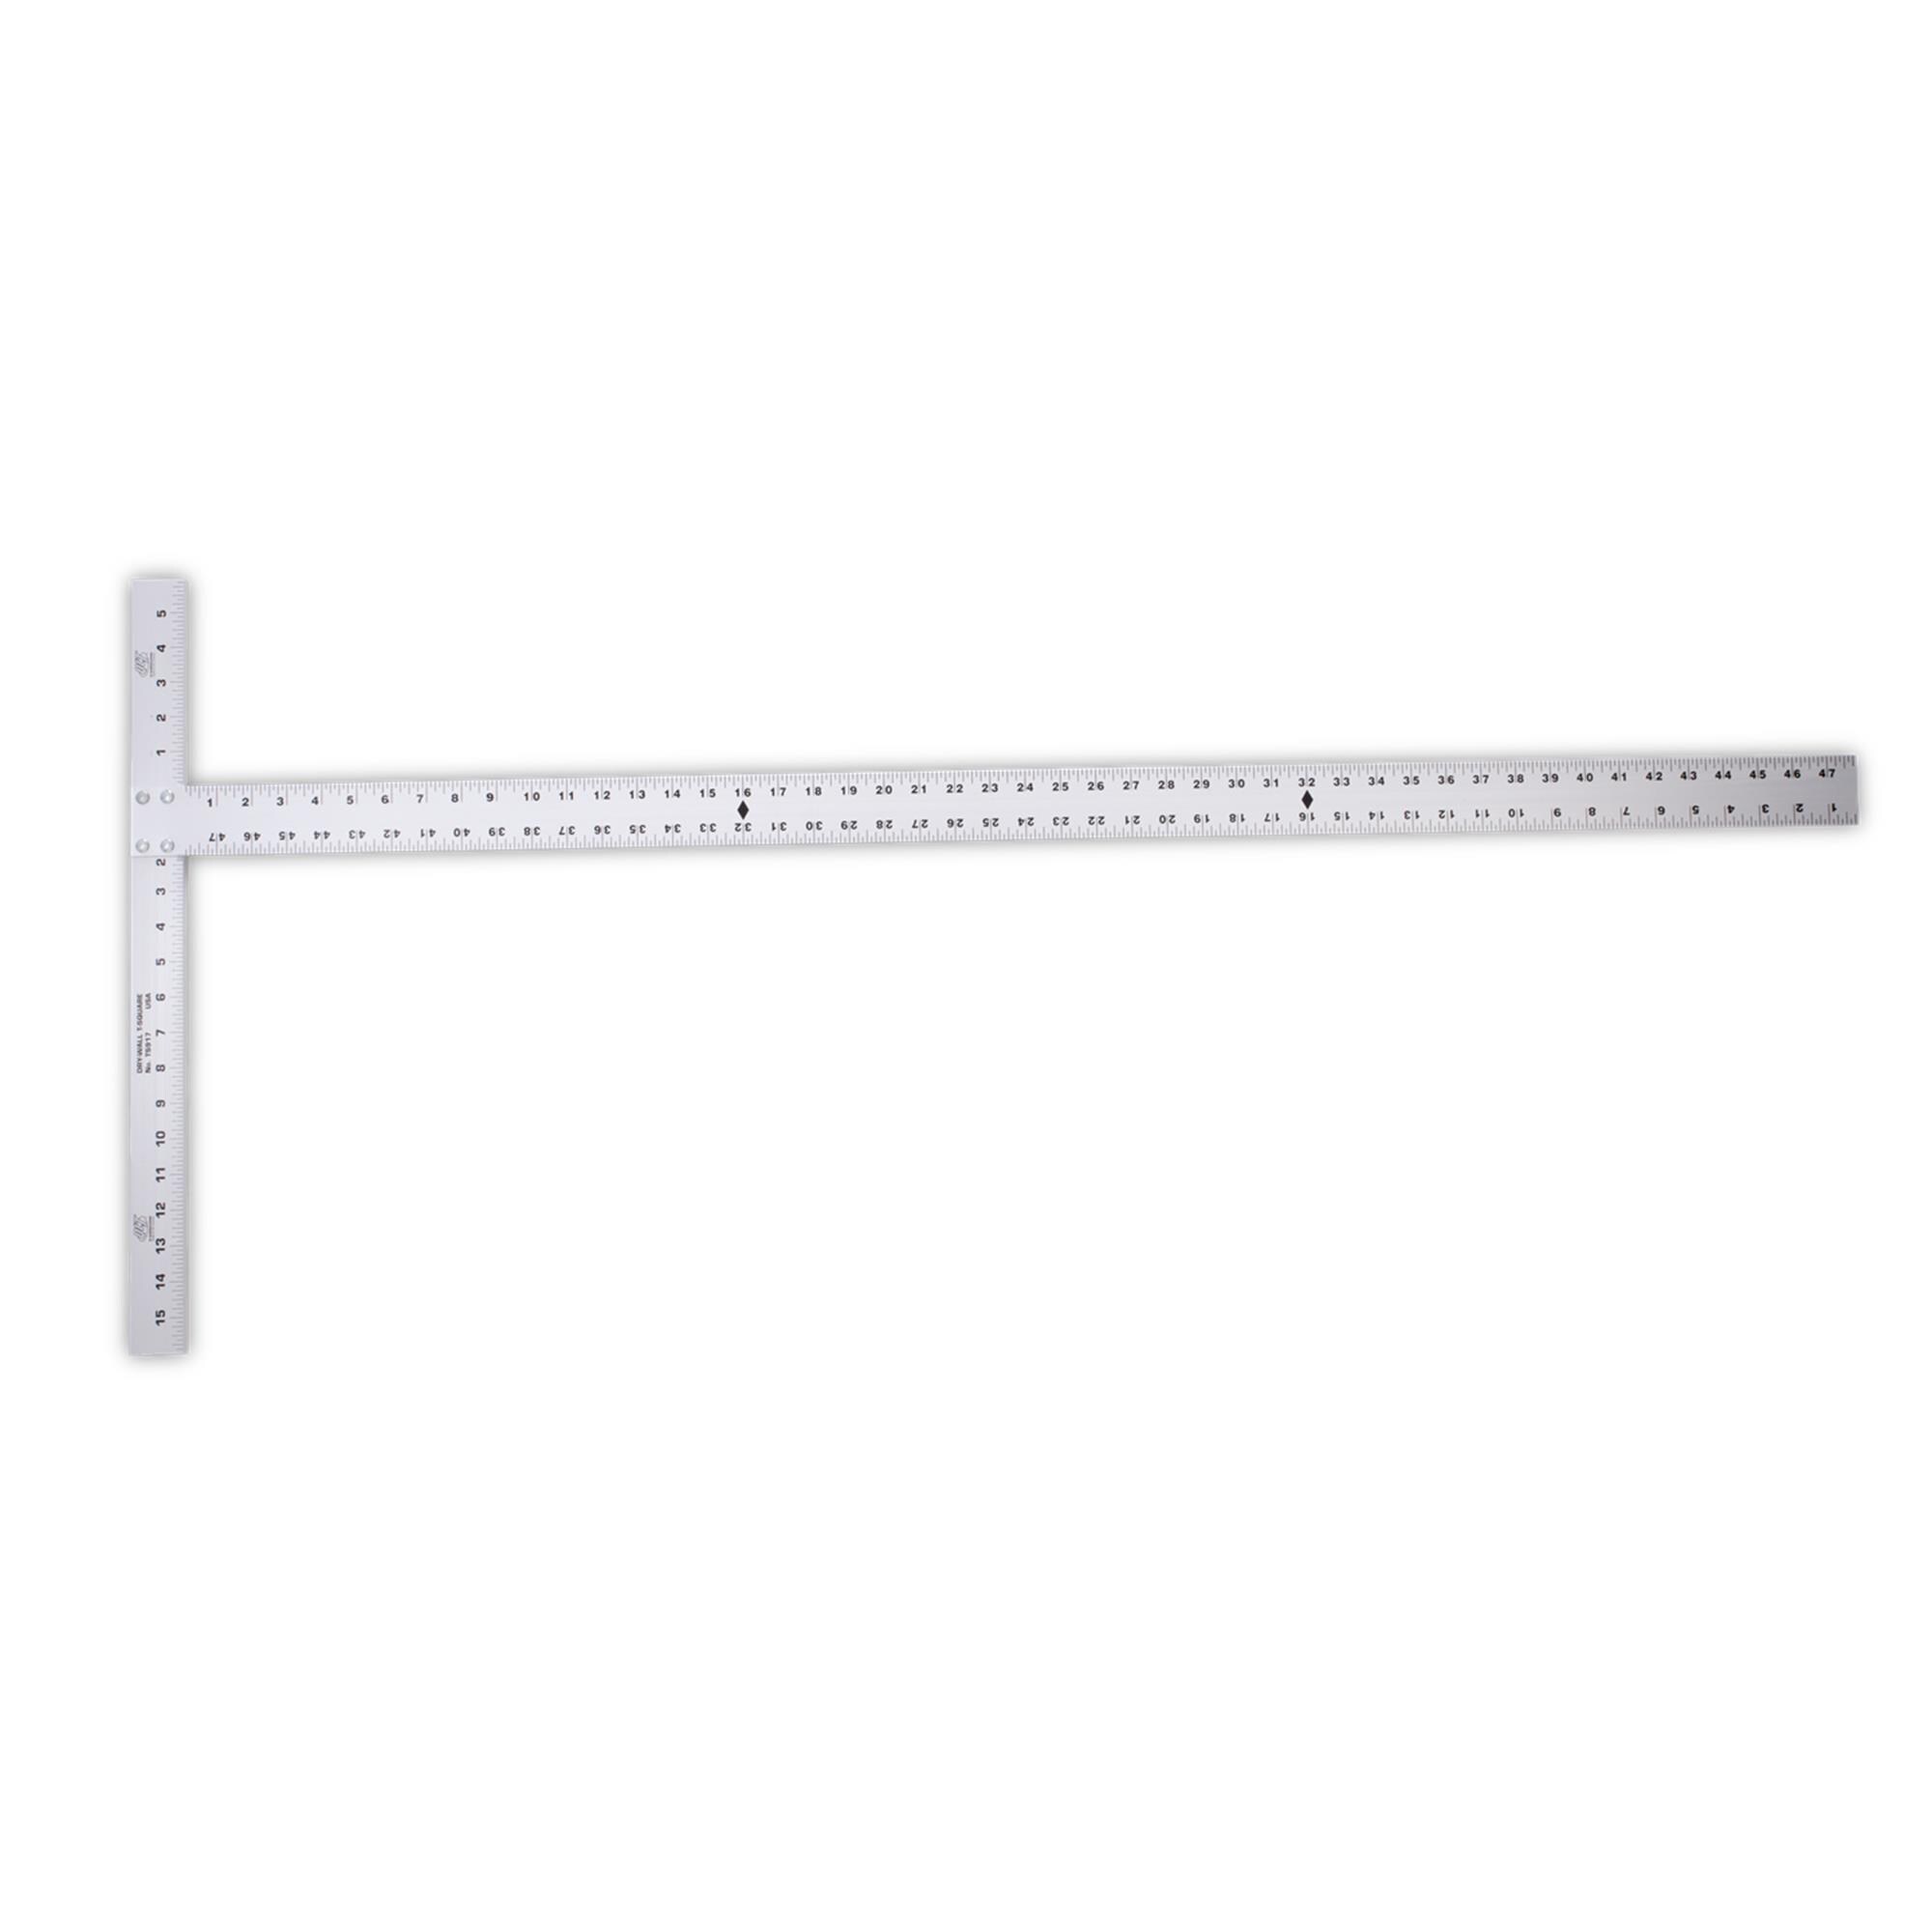 craftsman 48 in. t-square, heavy duty aluminum drywall squares from